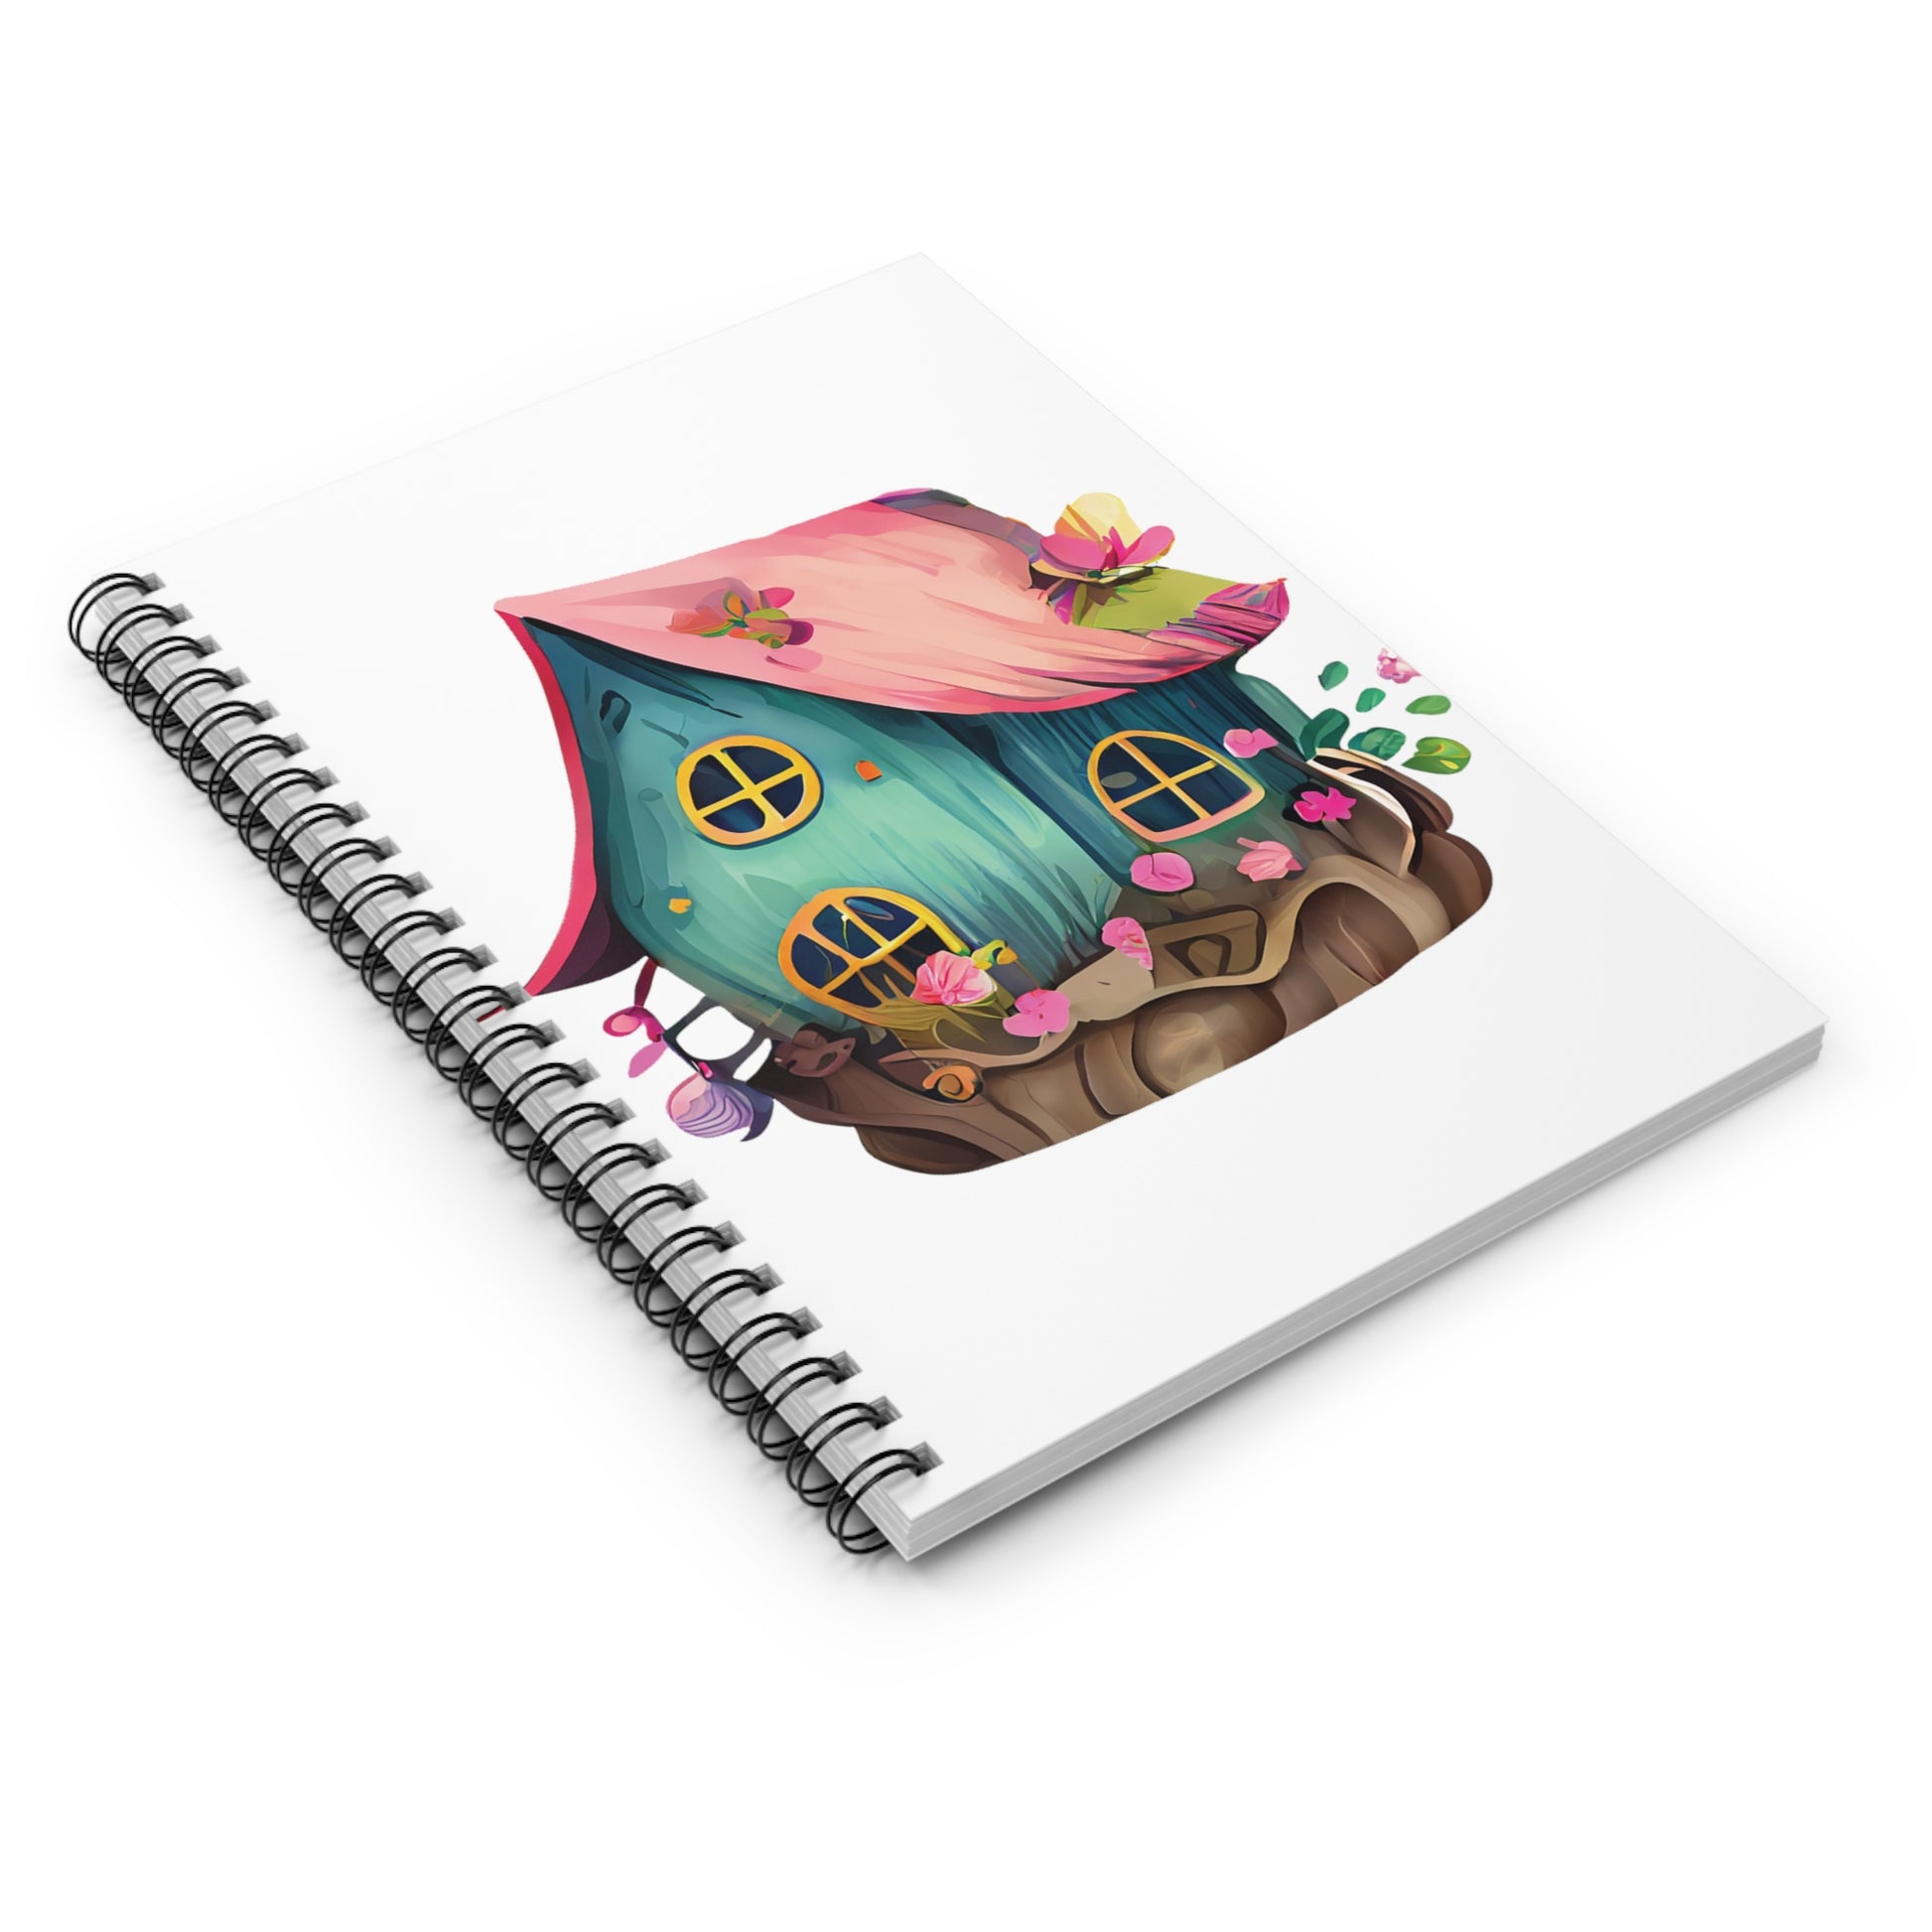 Fairy House: Spiral Notebook - Log Books - Journals - Diaries - and More Custom Printed by TheGlassyLass